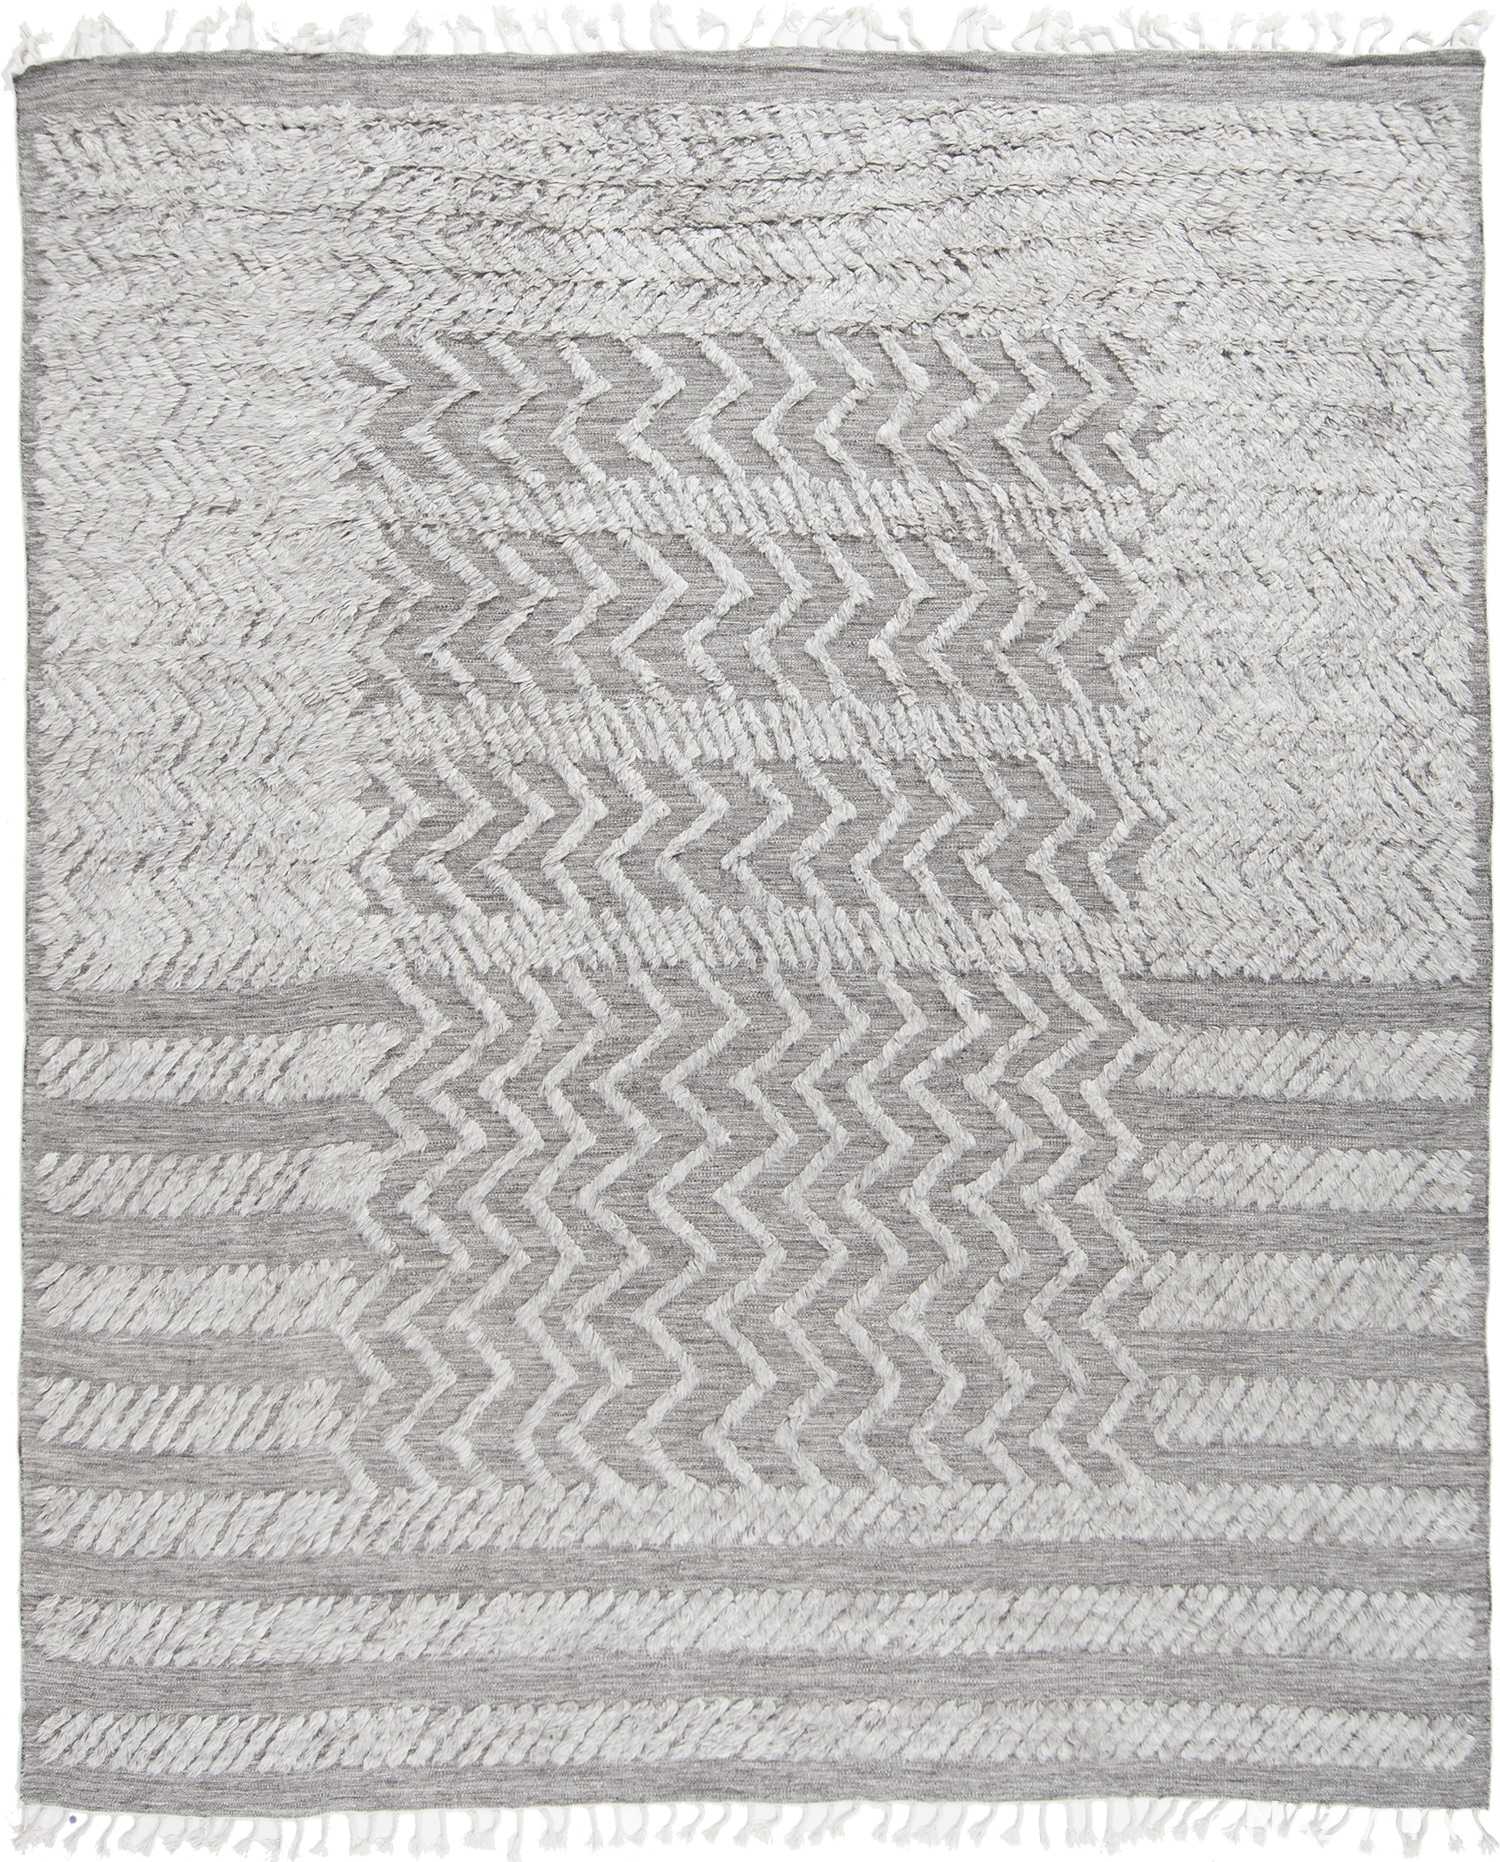 Modernist Collection Rug 172785866 by Nazmiyal NYC